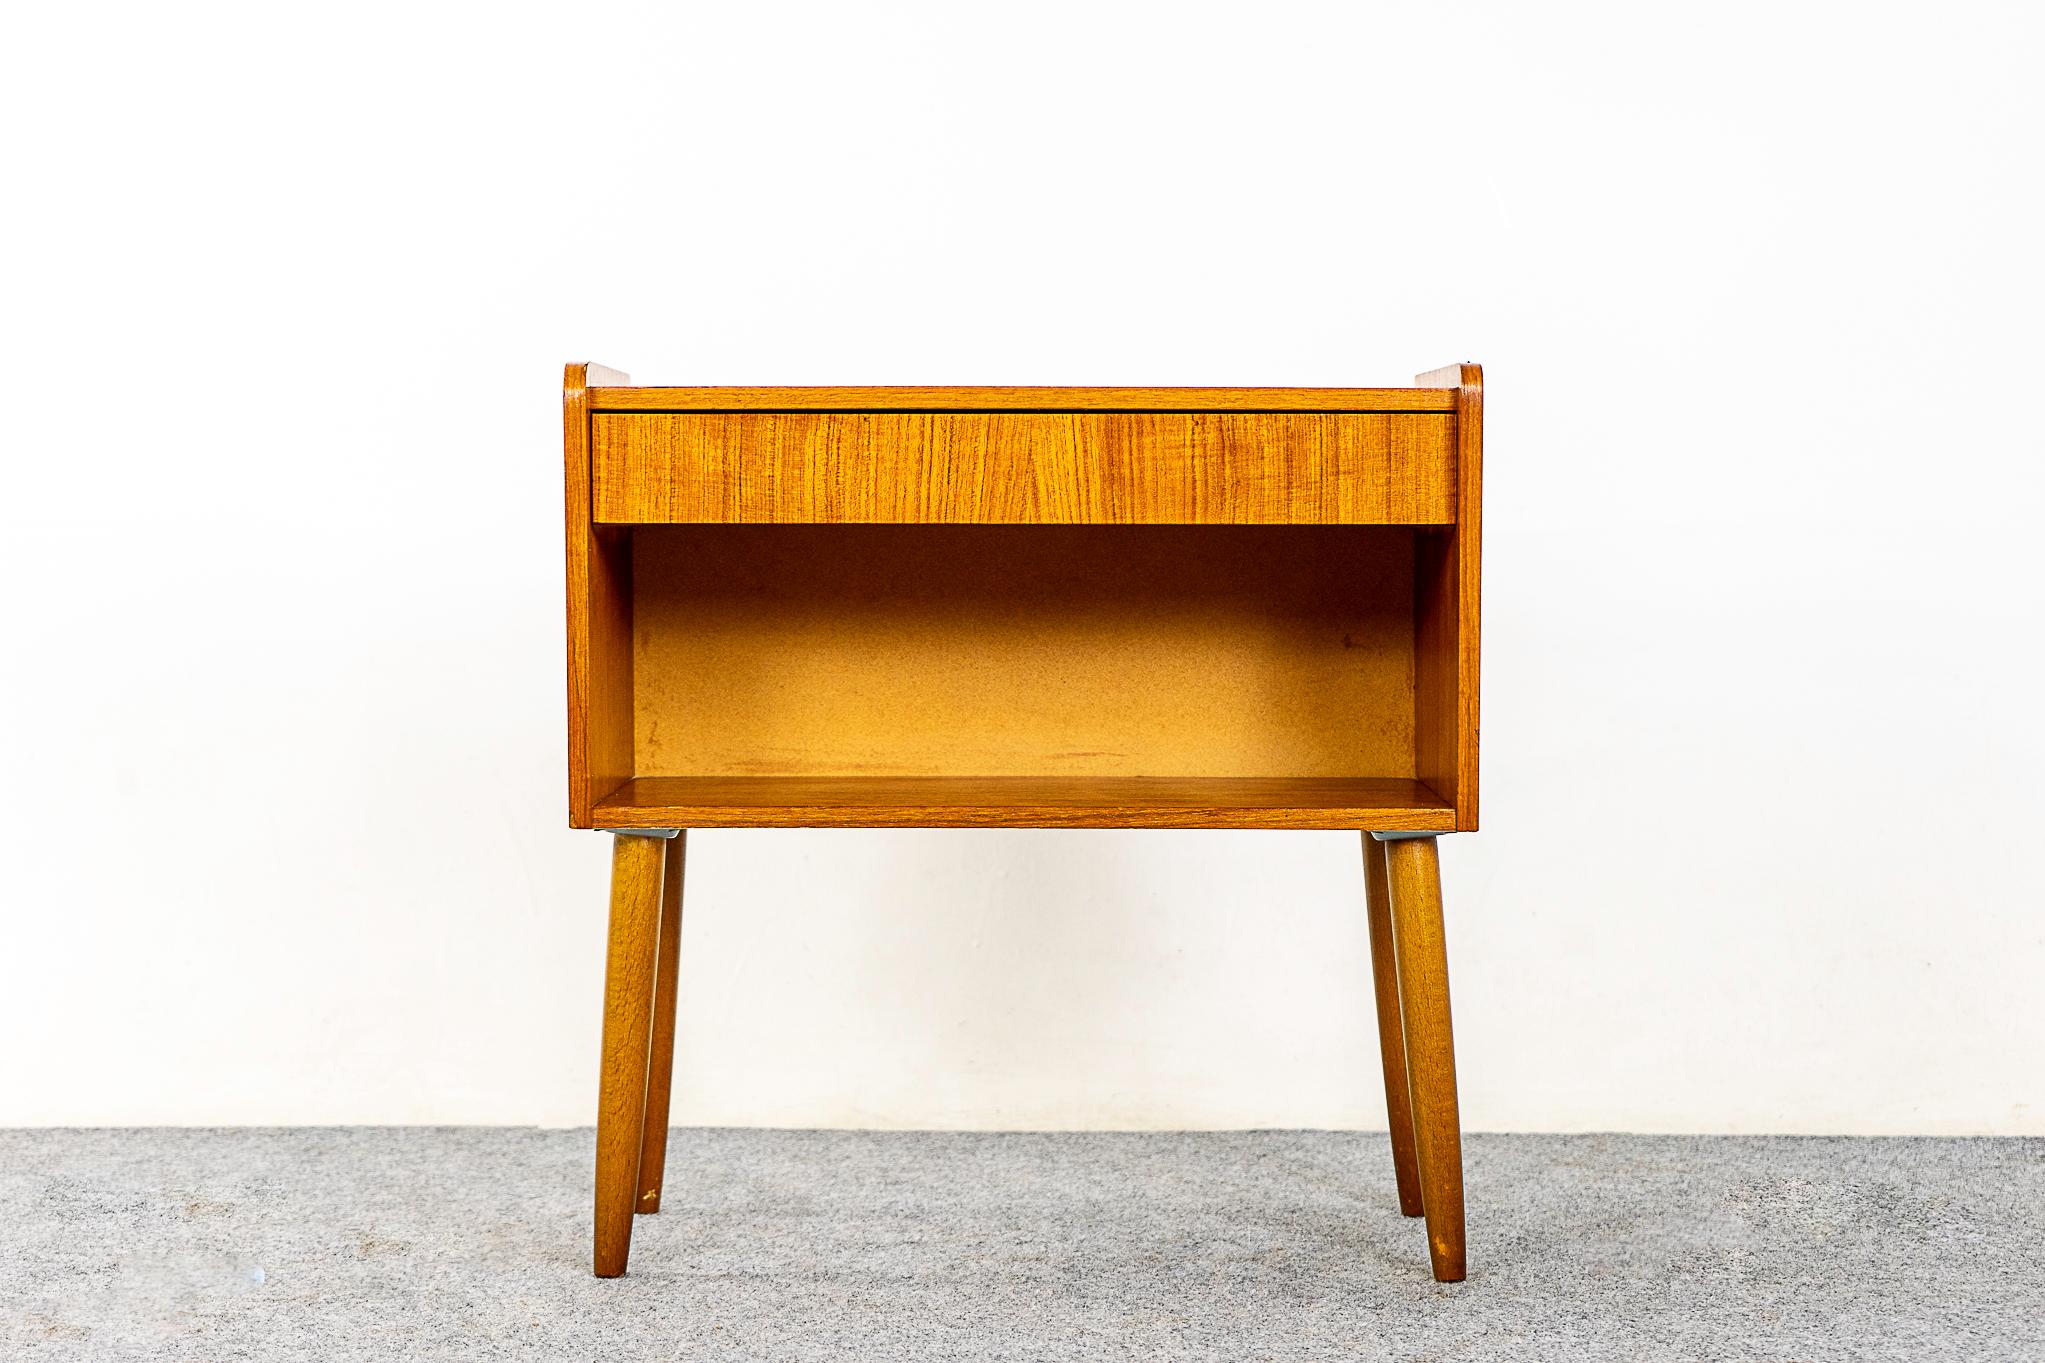 Teak Danish modern bedside table, circa 1960s. Dovetailed drawer offer storage for small items, cubby is perfect for your favorite book! Beautifully veneered case rests on slender, tapered, removable legs.

Unrestored item, some marks consistent